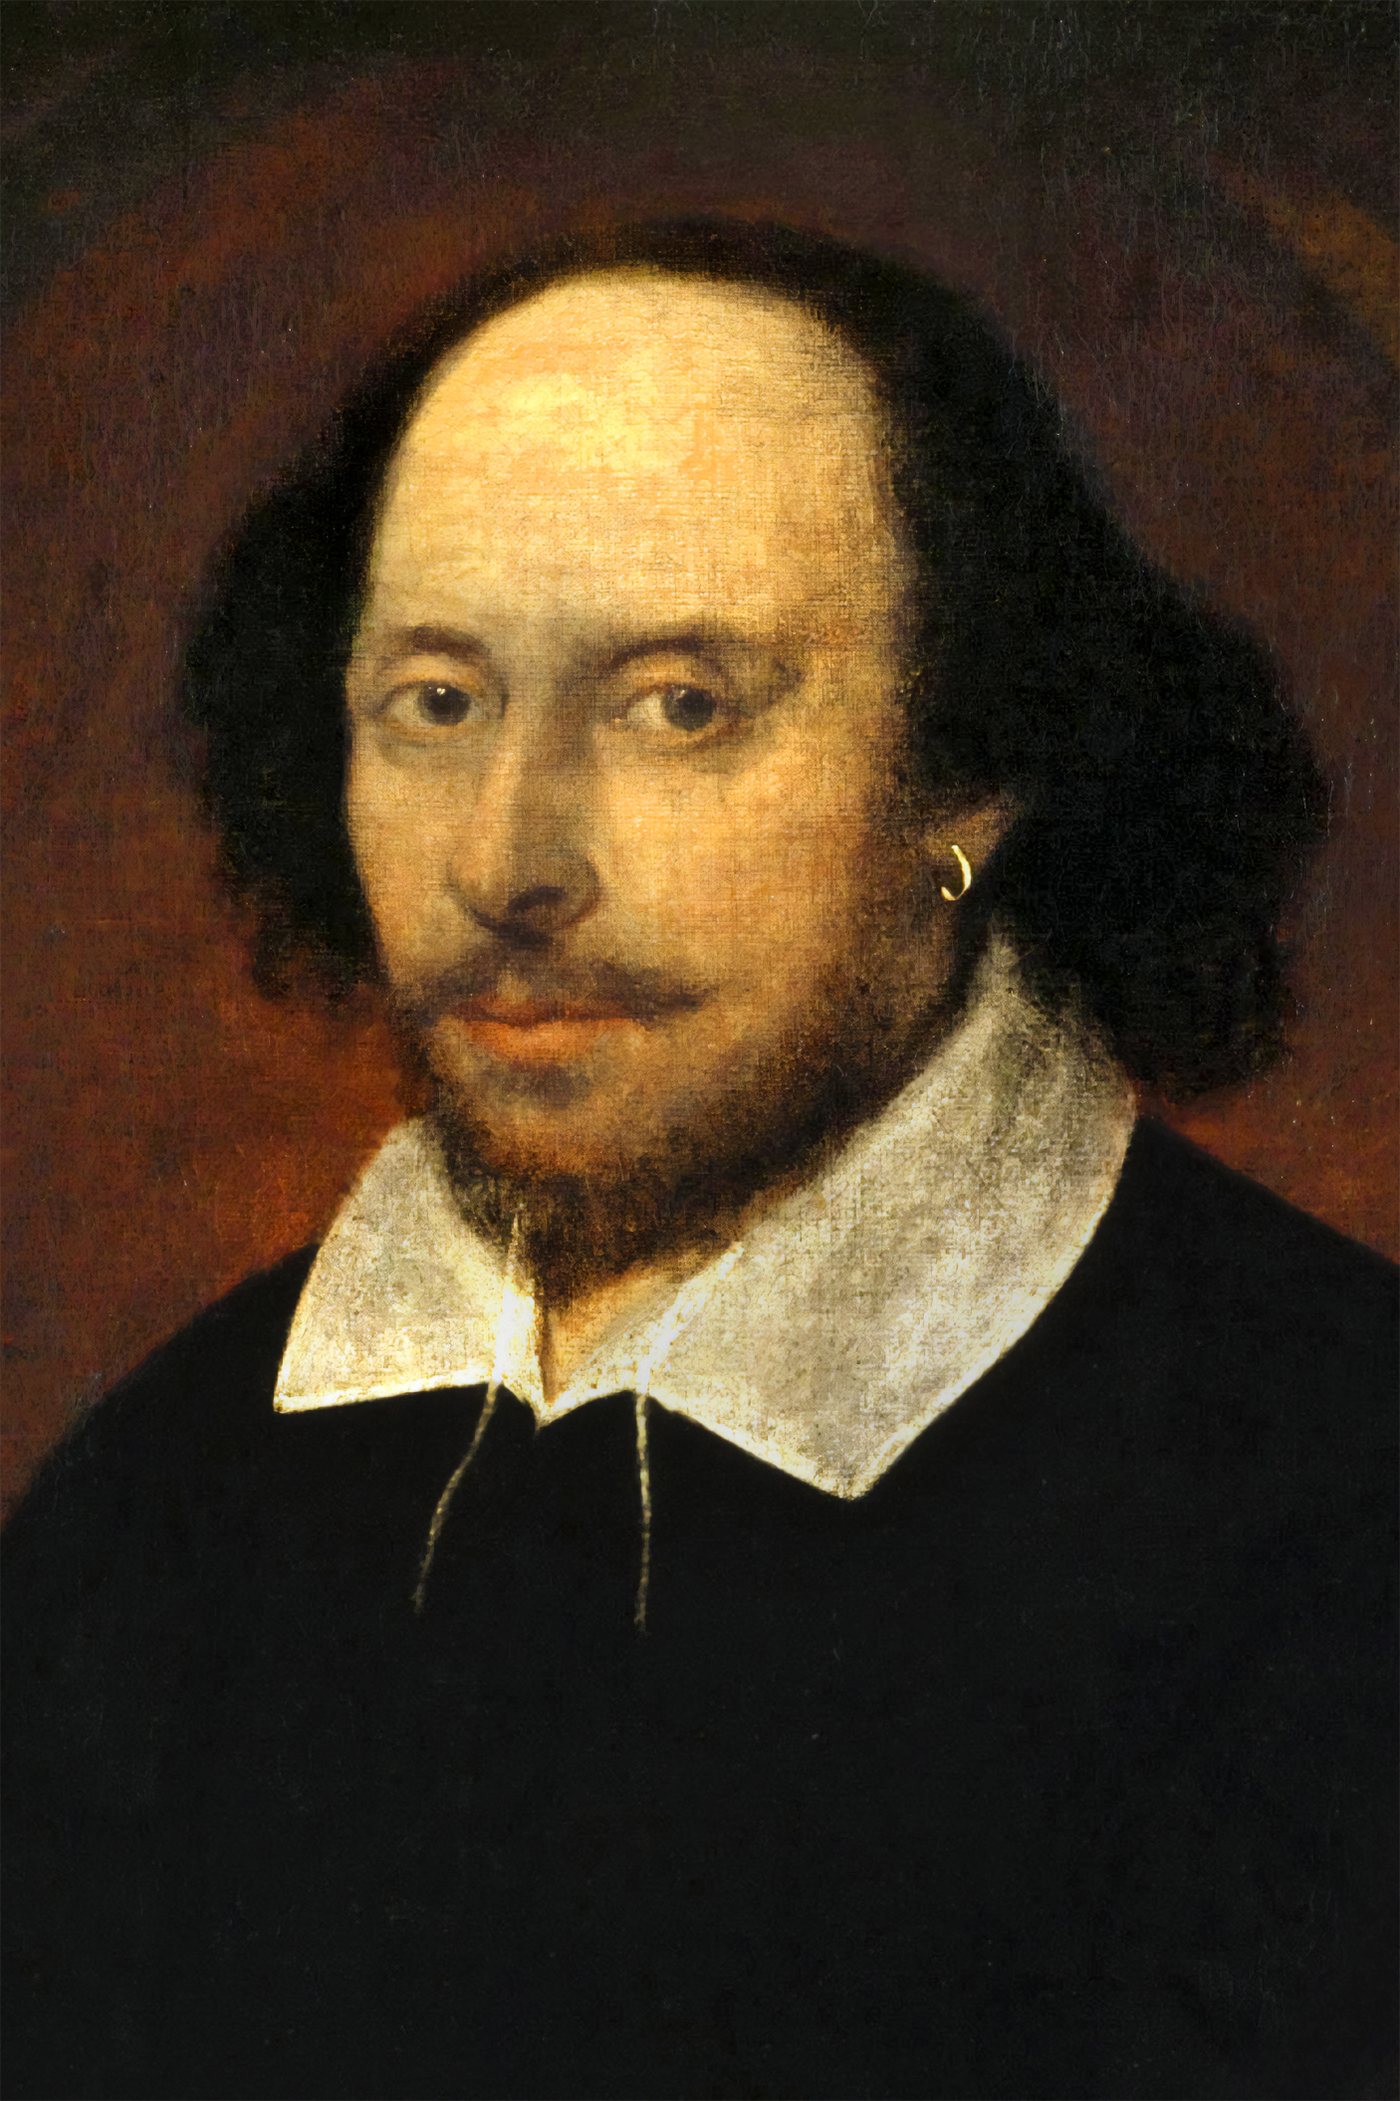 A detailed portrait of William Shakespeare, depicting him with a high forehead, prominent brown eyes, and a trimmed beard. He wears a white collar and a black coat. An earring dangles from his left ear. The background is a muted brown, focusing attention on his contemplative expression.